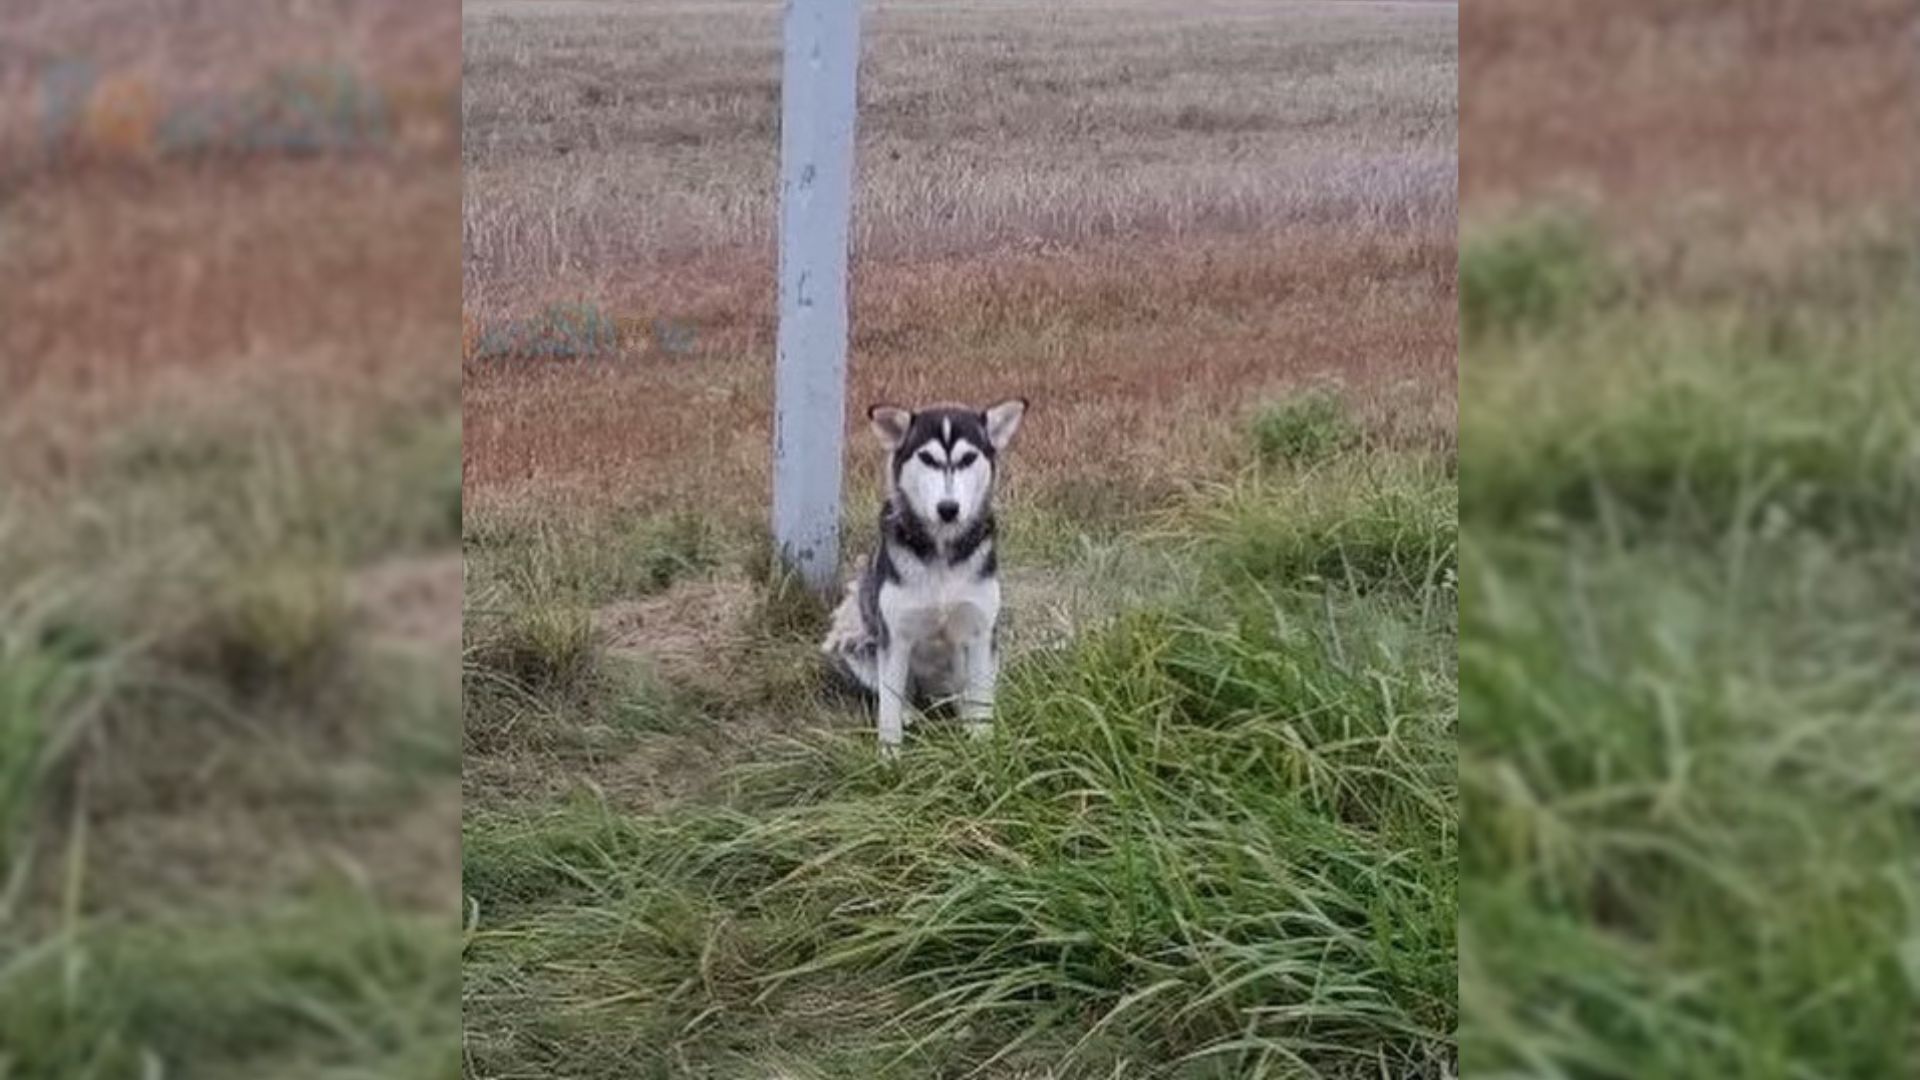 Dog Dumped By The Road Keeps Watching The Passing Cars, Hoping His Owner Returns